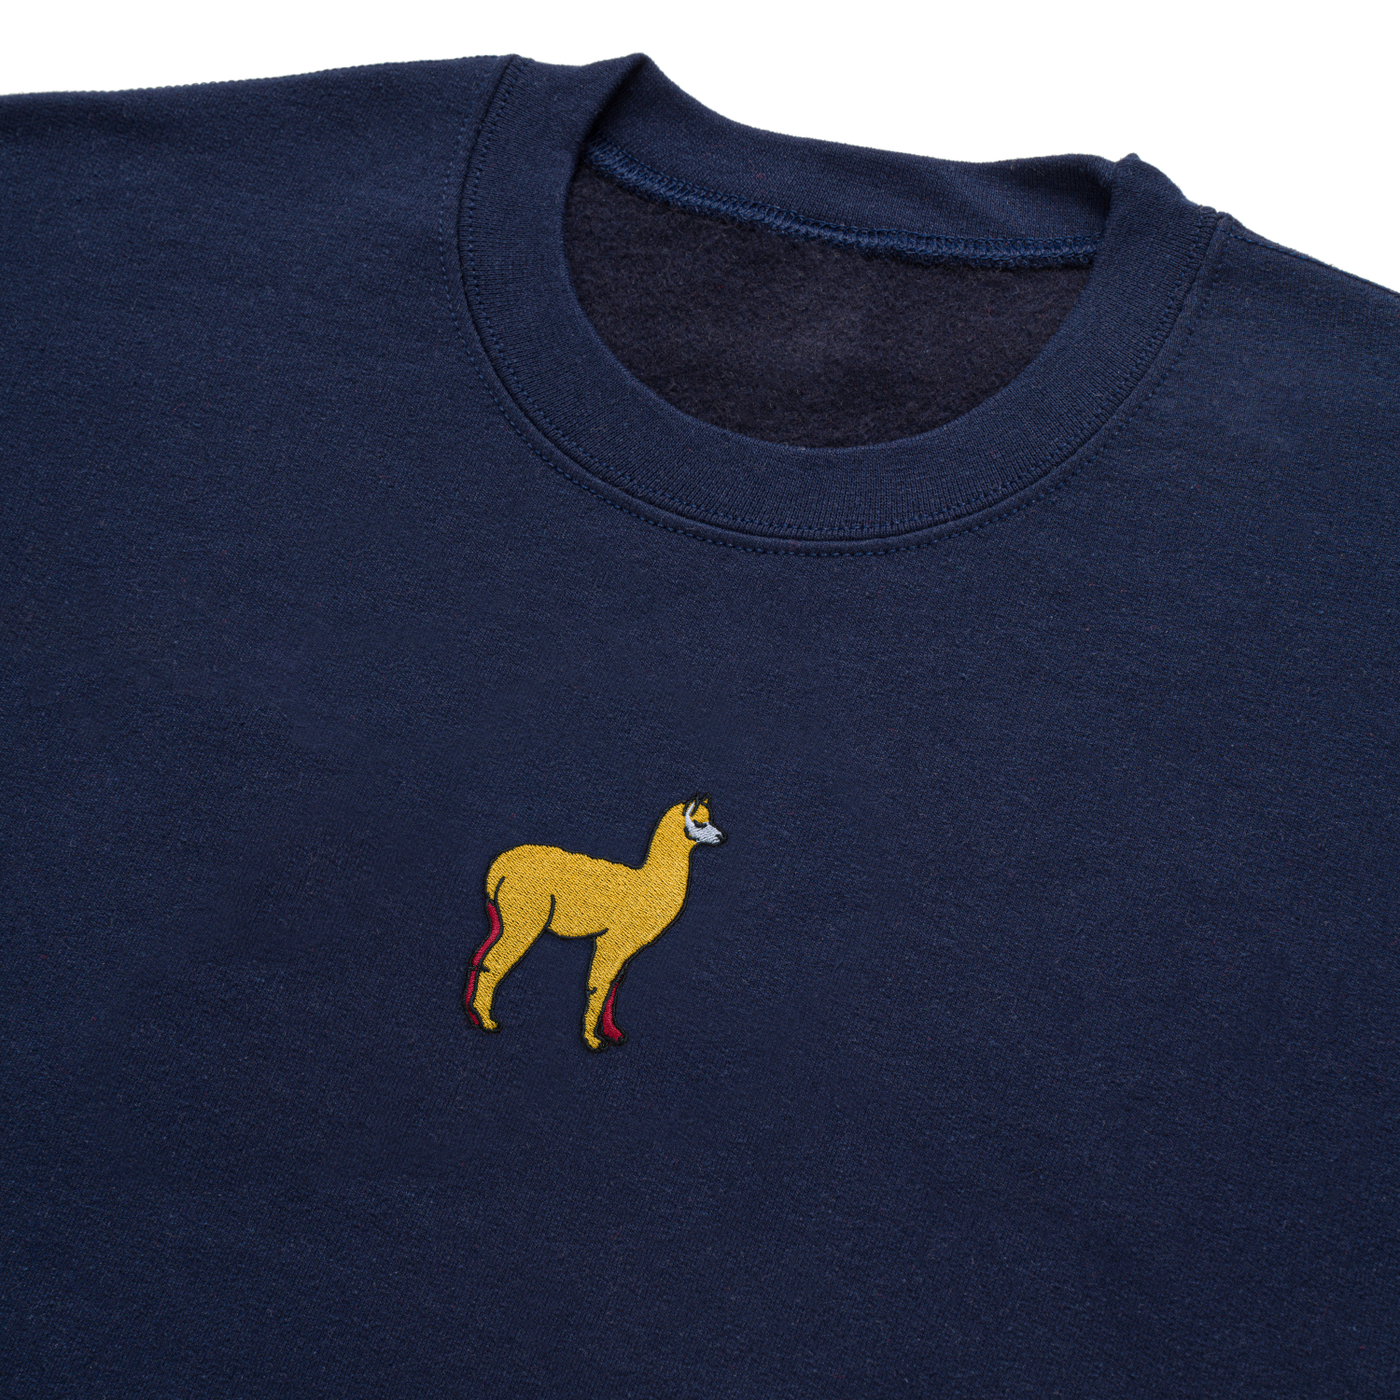 Bobby's Planet Men's Embroidered Alpaca Sweatshirt from South American Amazon Animals Collection in Navy Color#color_navy